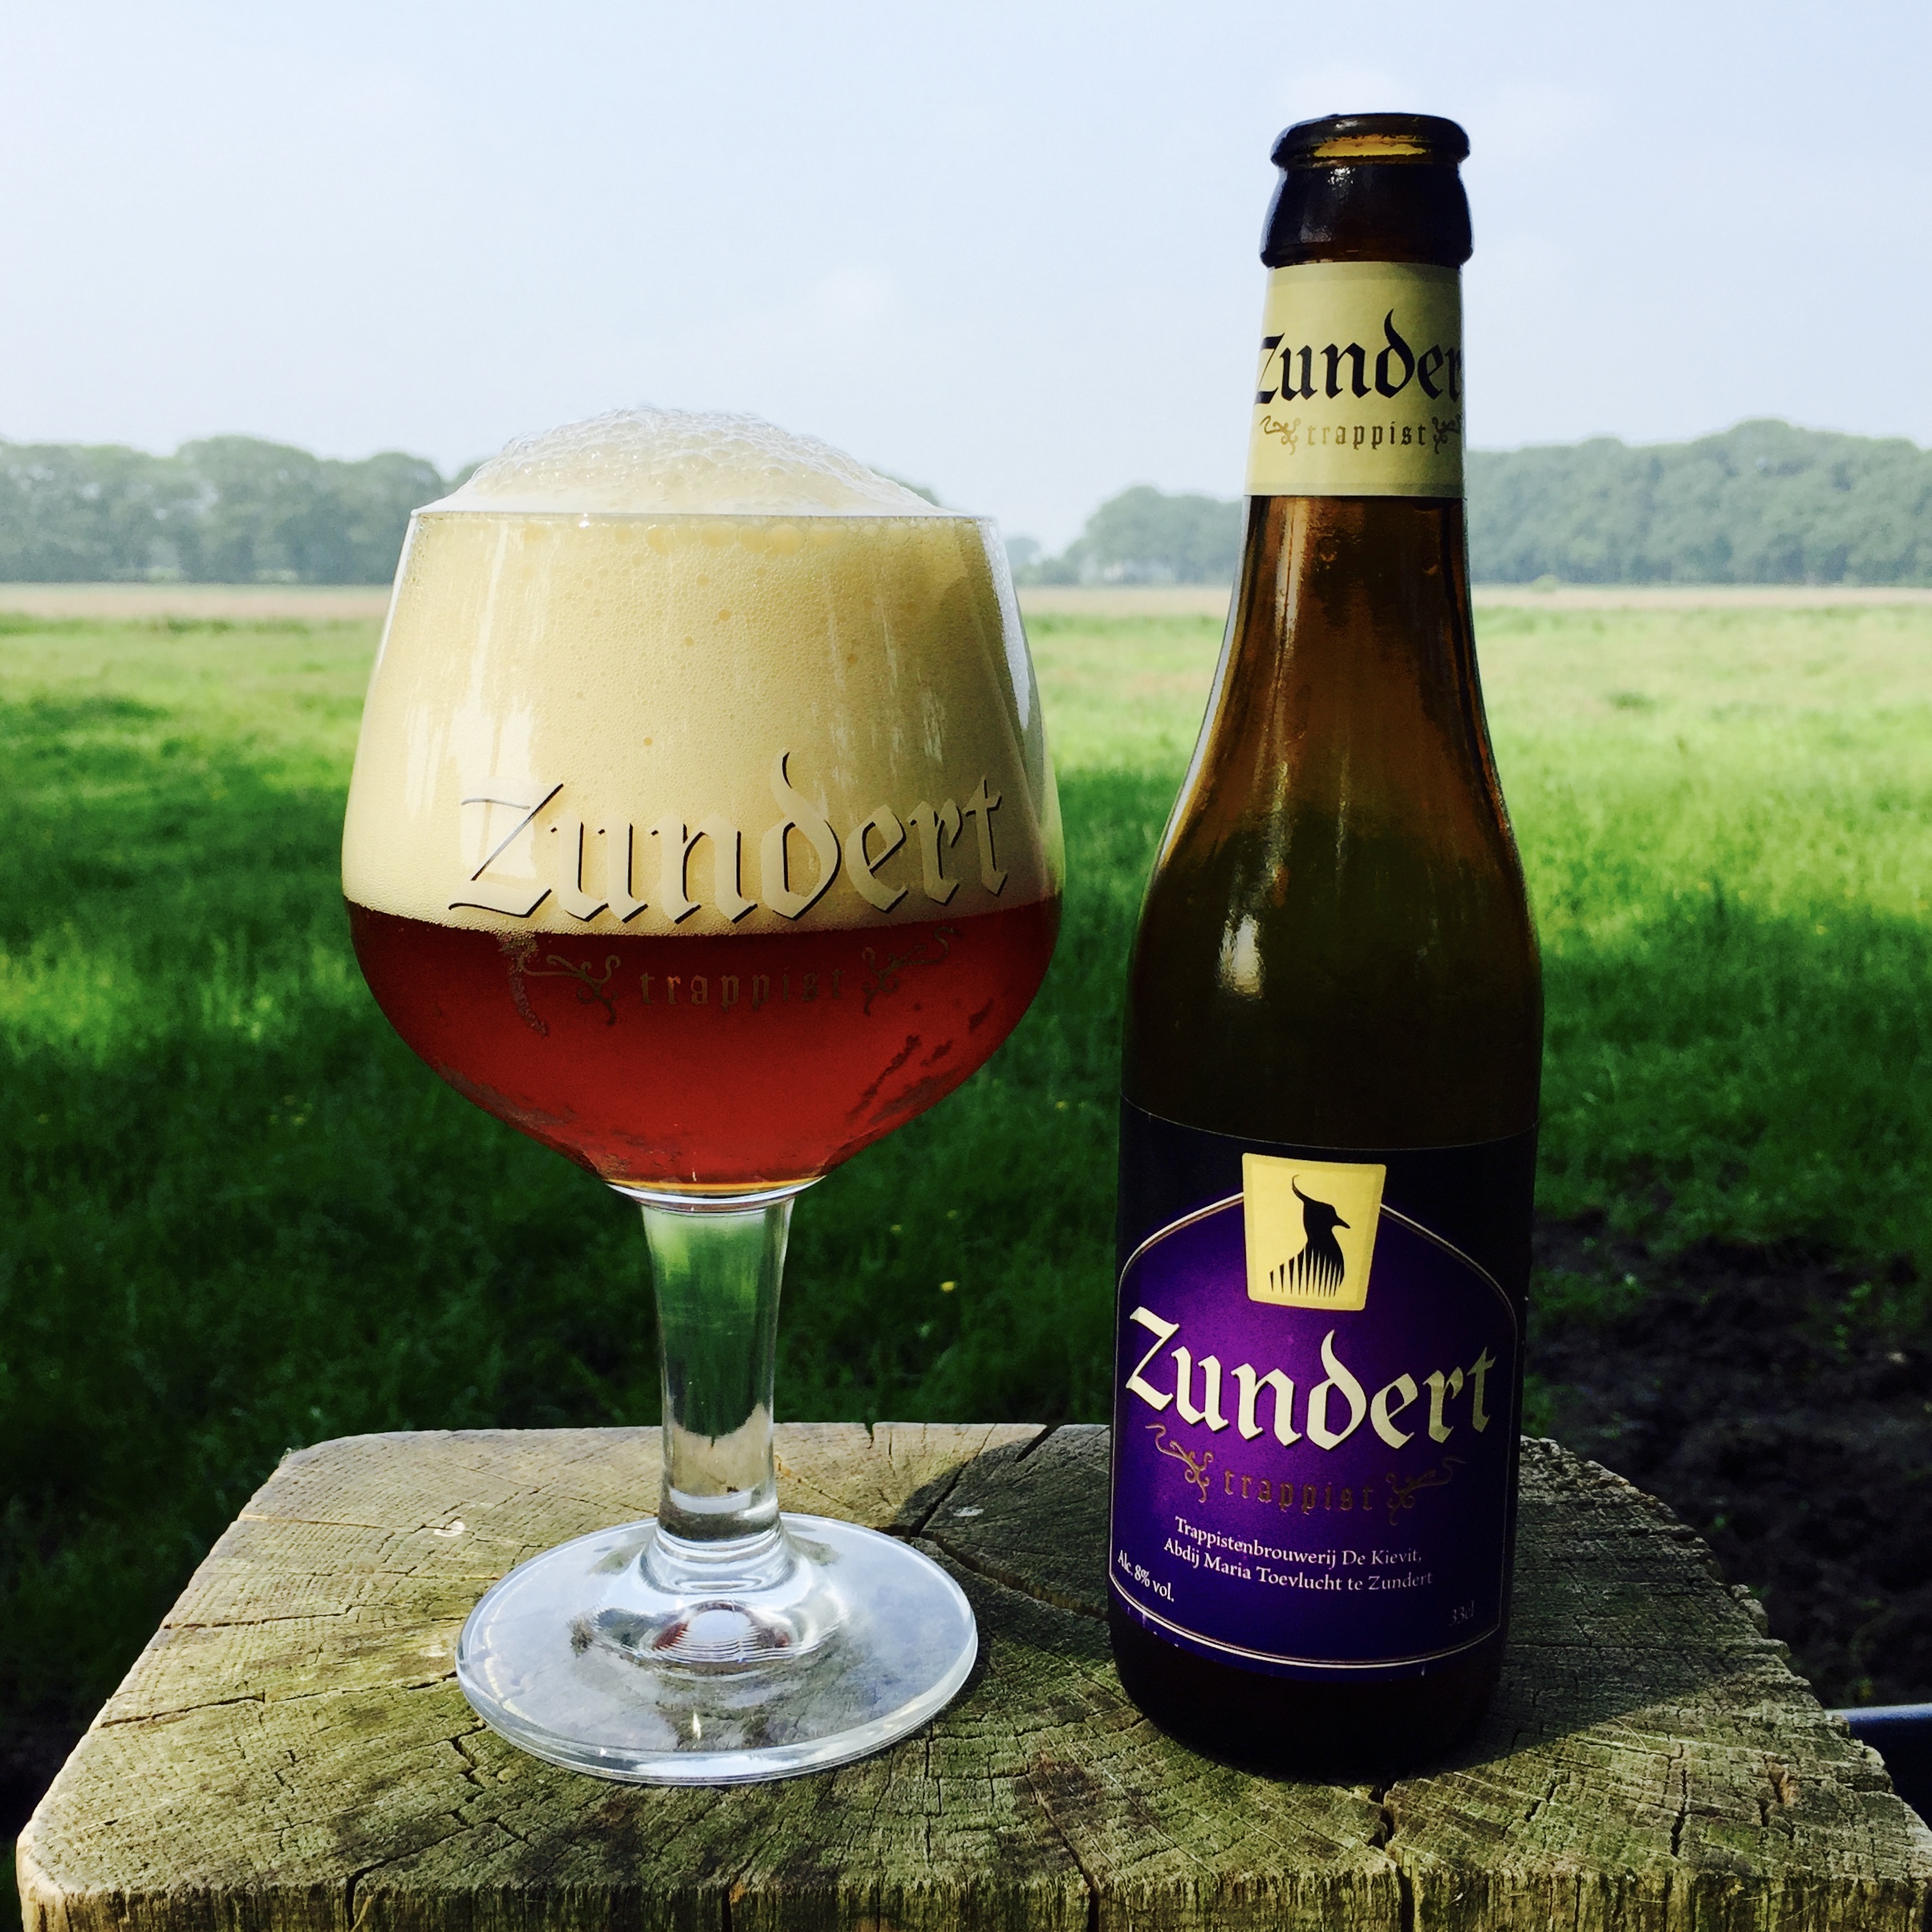   Taste centuries of perfection    Mini Trappist Tour    Get to know four iconic Trappist Breweries  